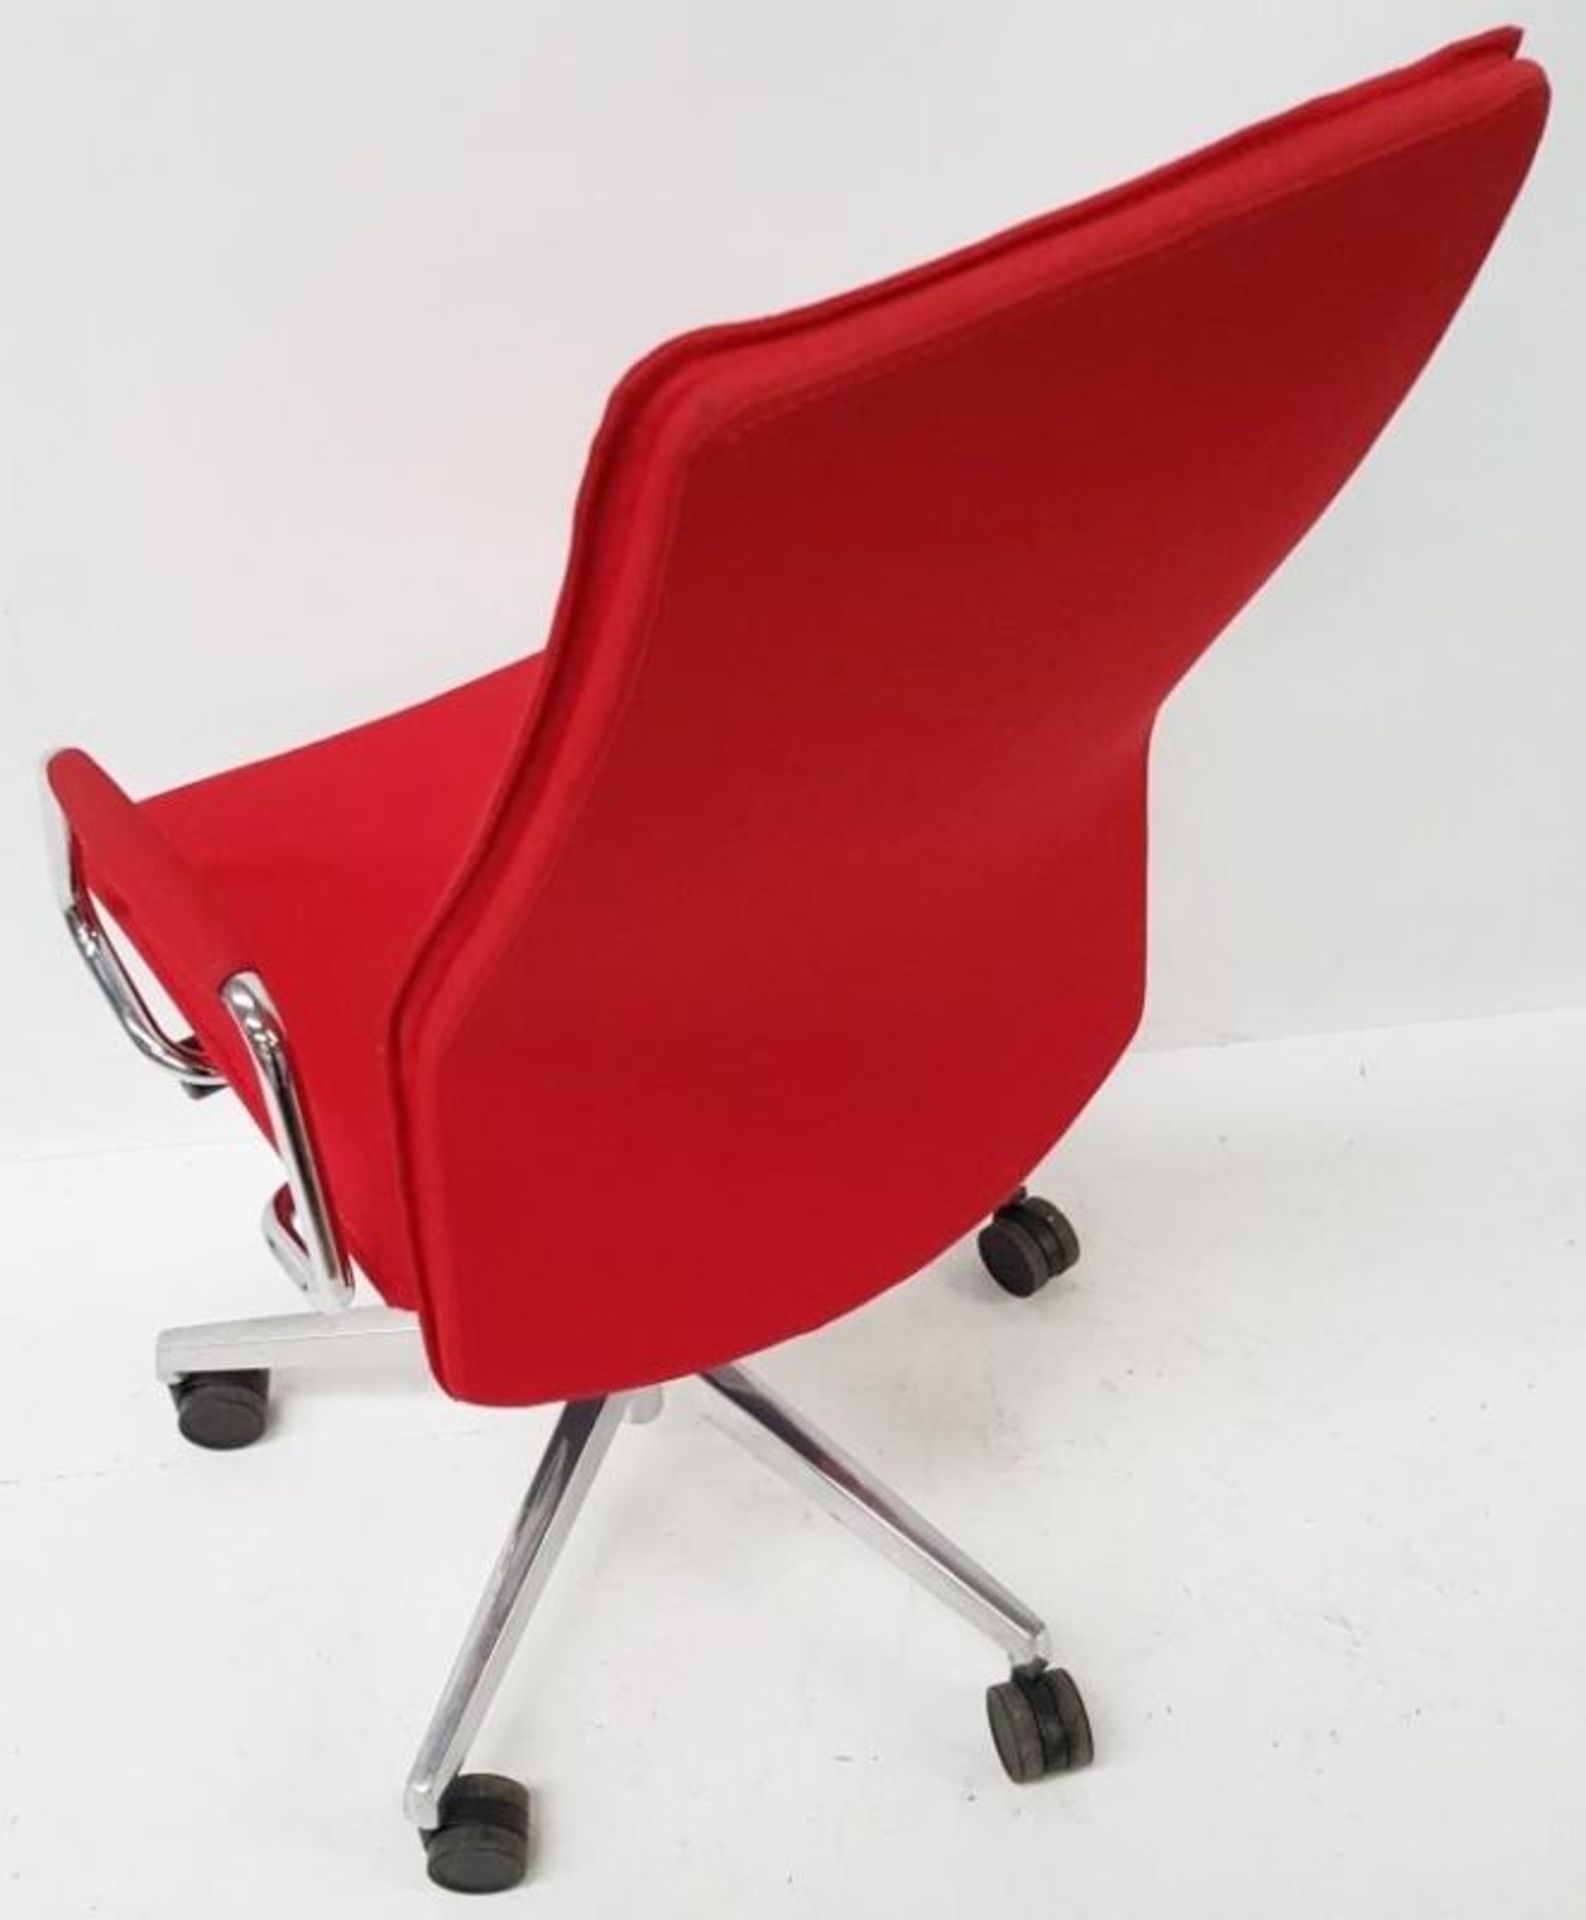 1 x 'Sven Christiansen' Premium Designer High-back Office Chair In Red (HBB1HA) - Used, In Very Good - Image 2 of 7